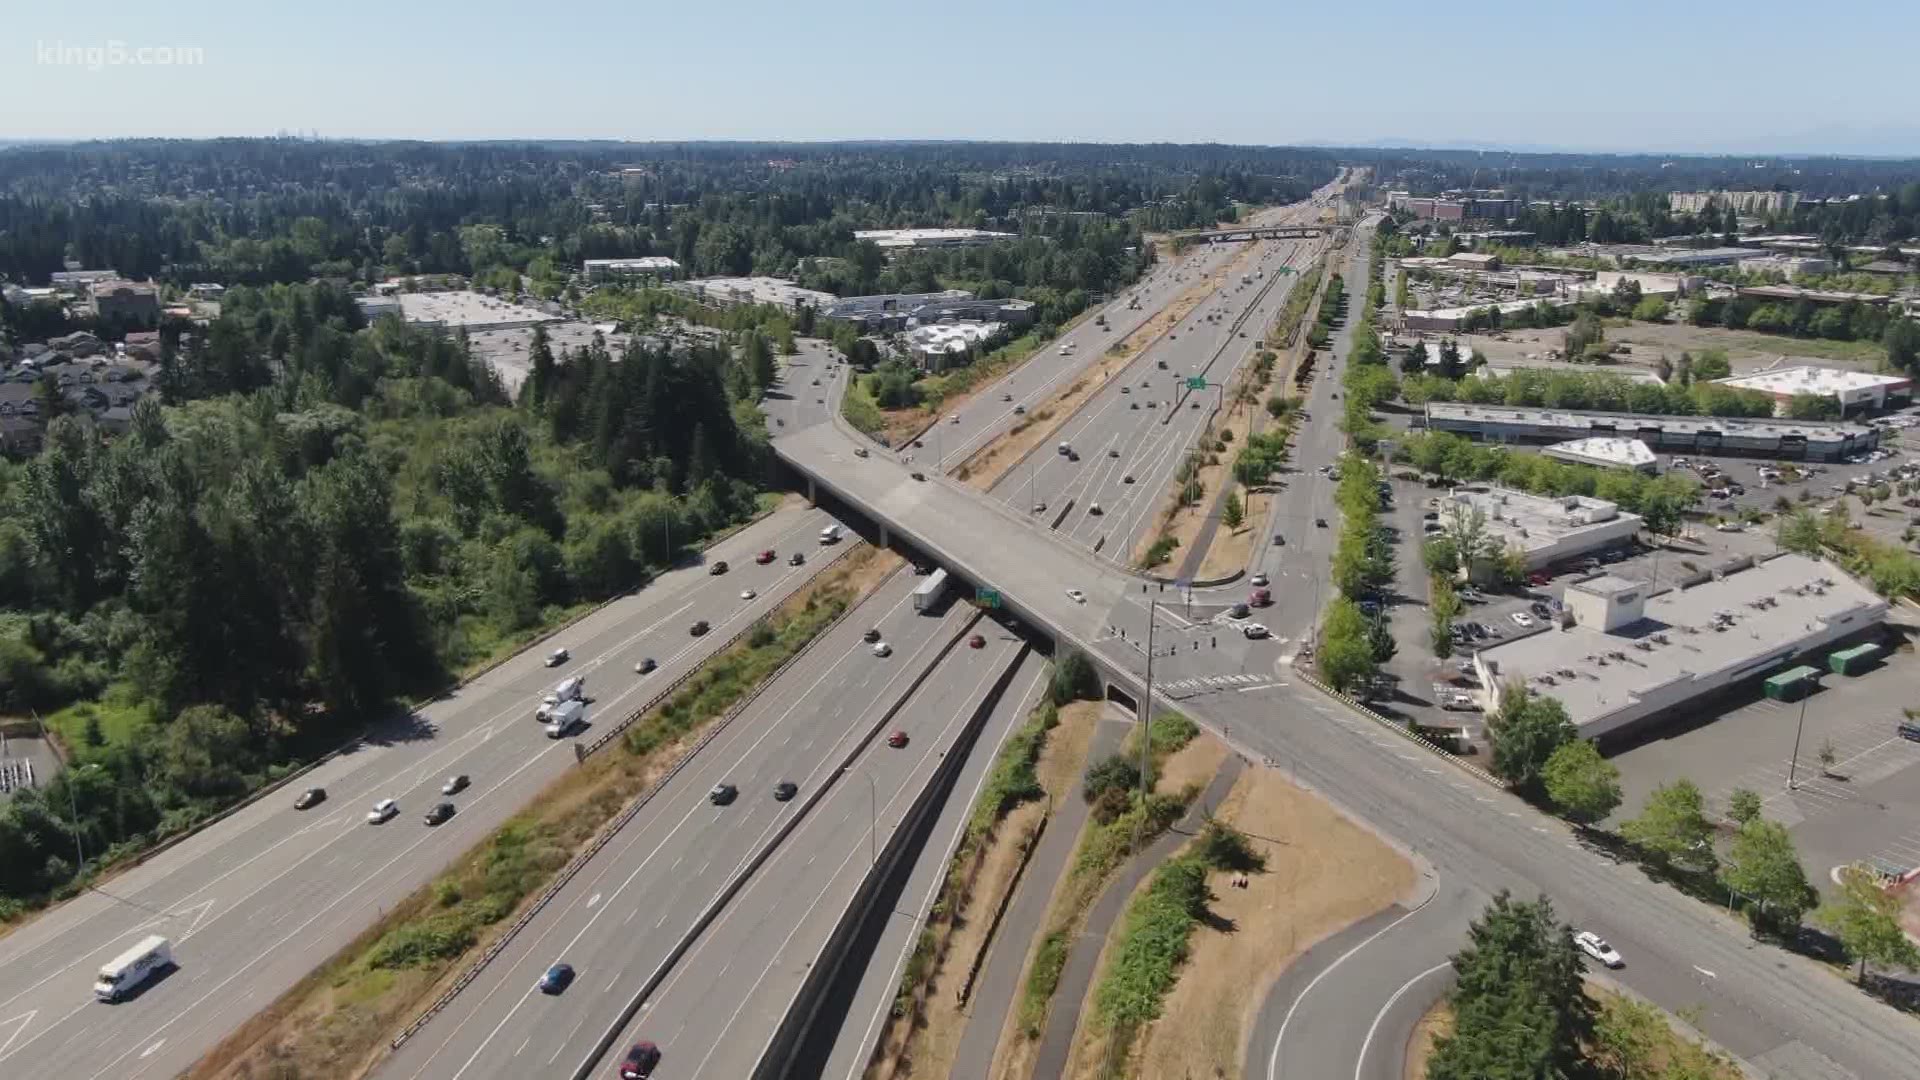 Washington traffic hasn't come back to 2019 levels. State Route 520 is down 40% and Interstate 90 is off 20%.